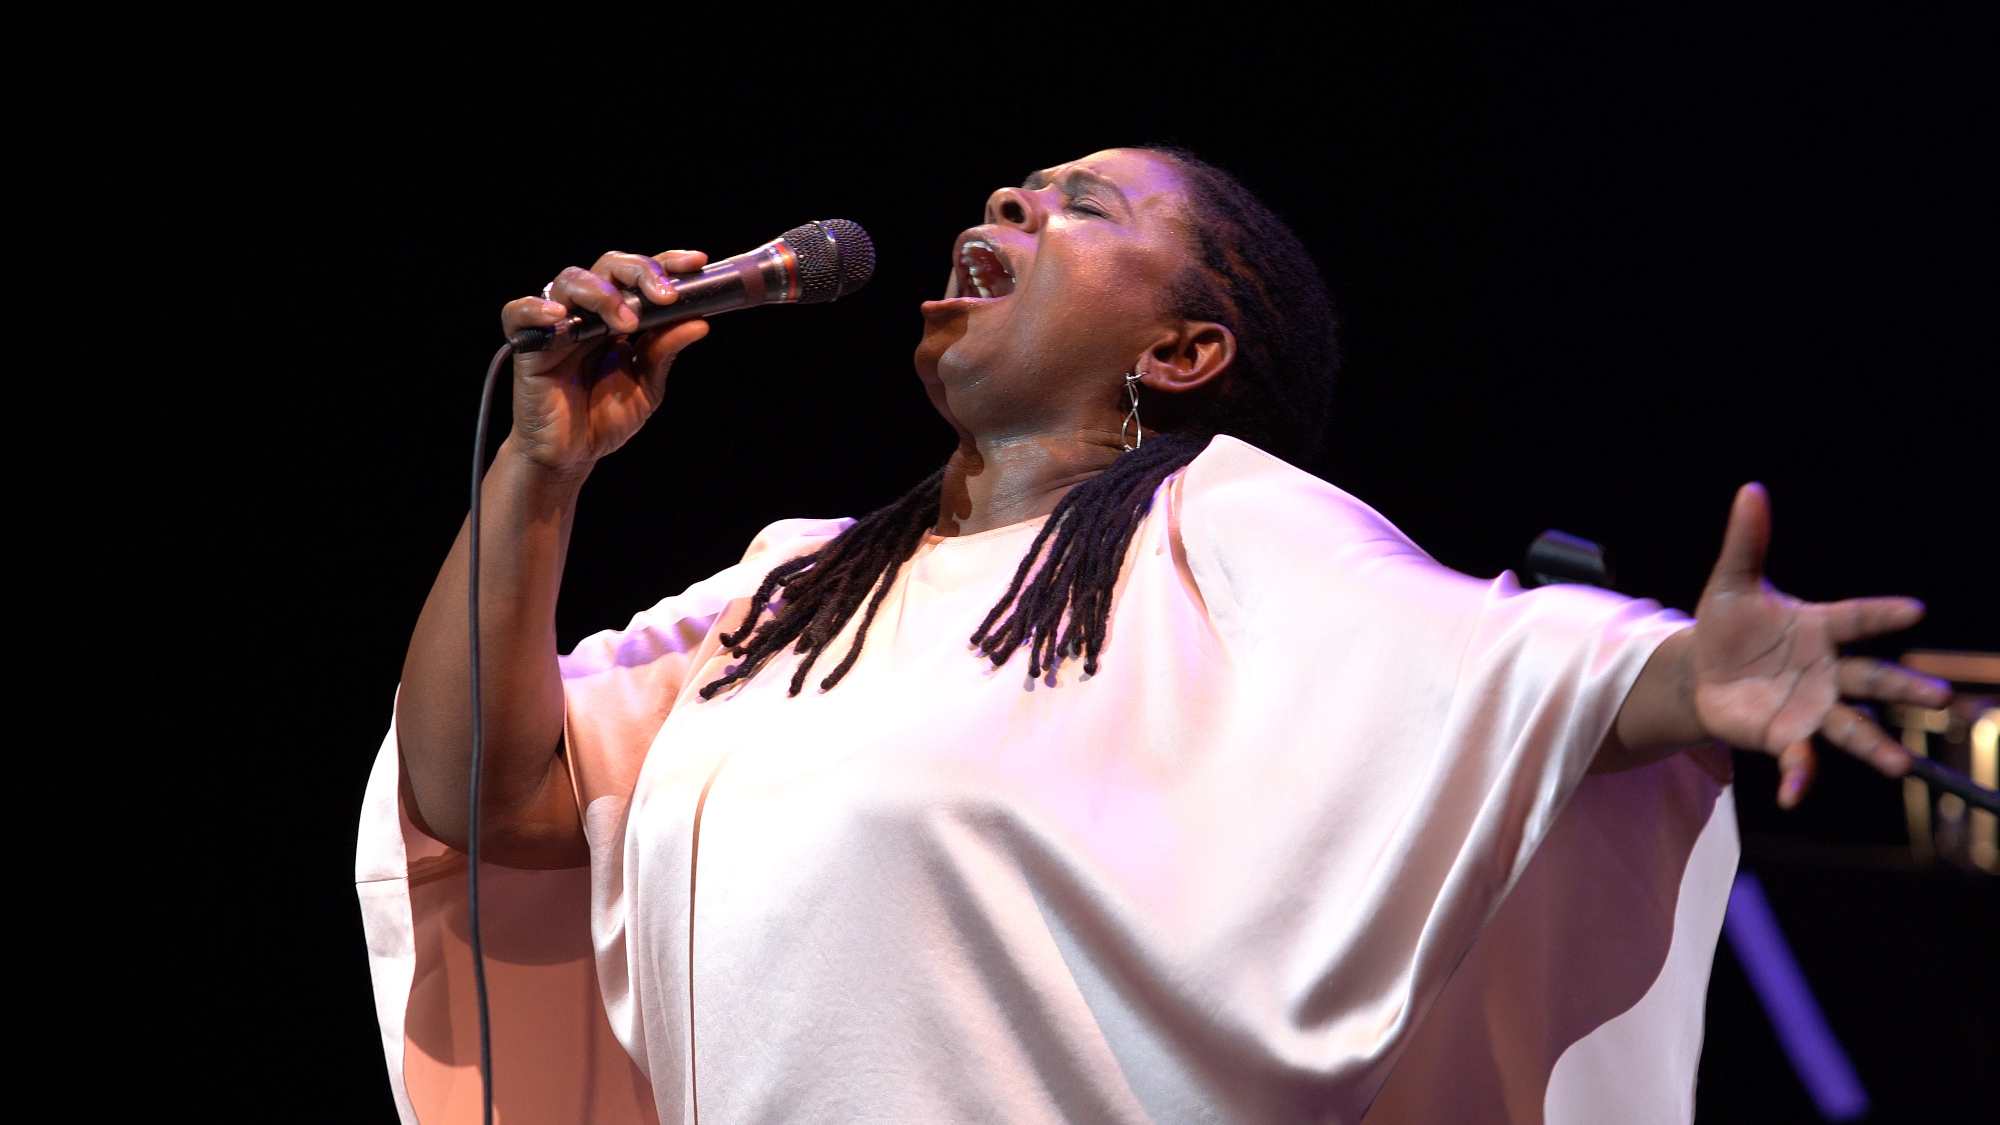 Ruthie Foster Performance of “Joy Comes Back” Is A Healing Track From Upcoming Record